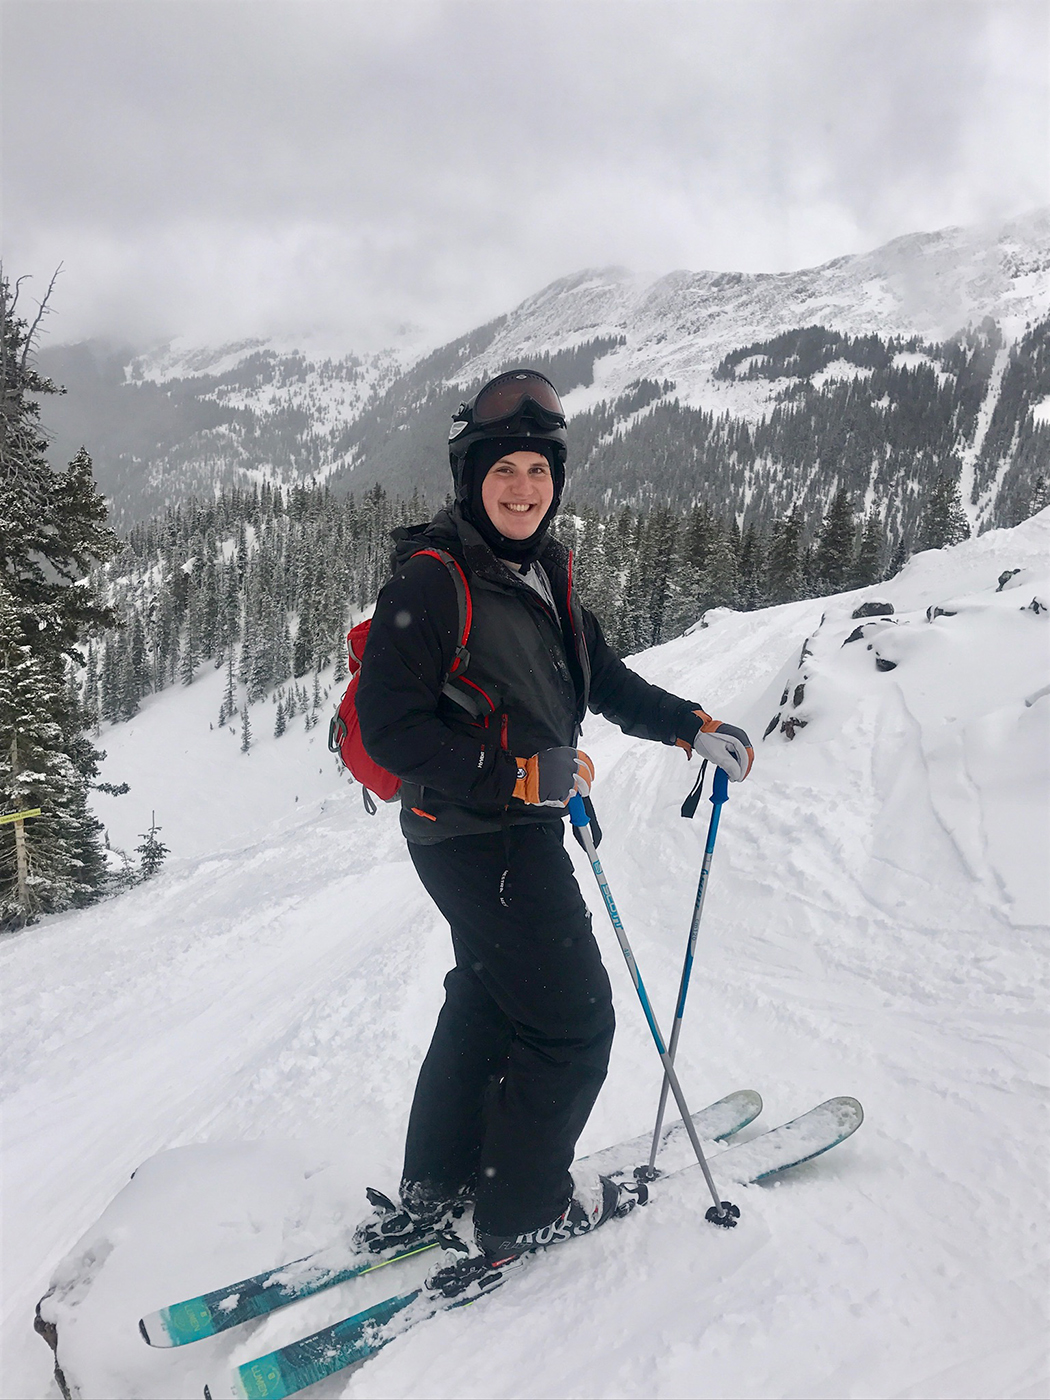 SMU-in-Taos student Carson Yeager prepares to ski down the snow-covered mountain in Taos, New Mexico.